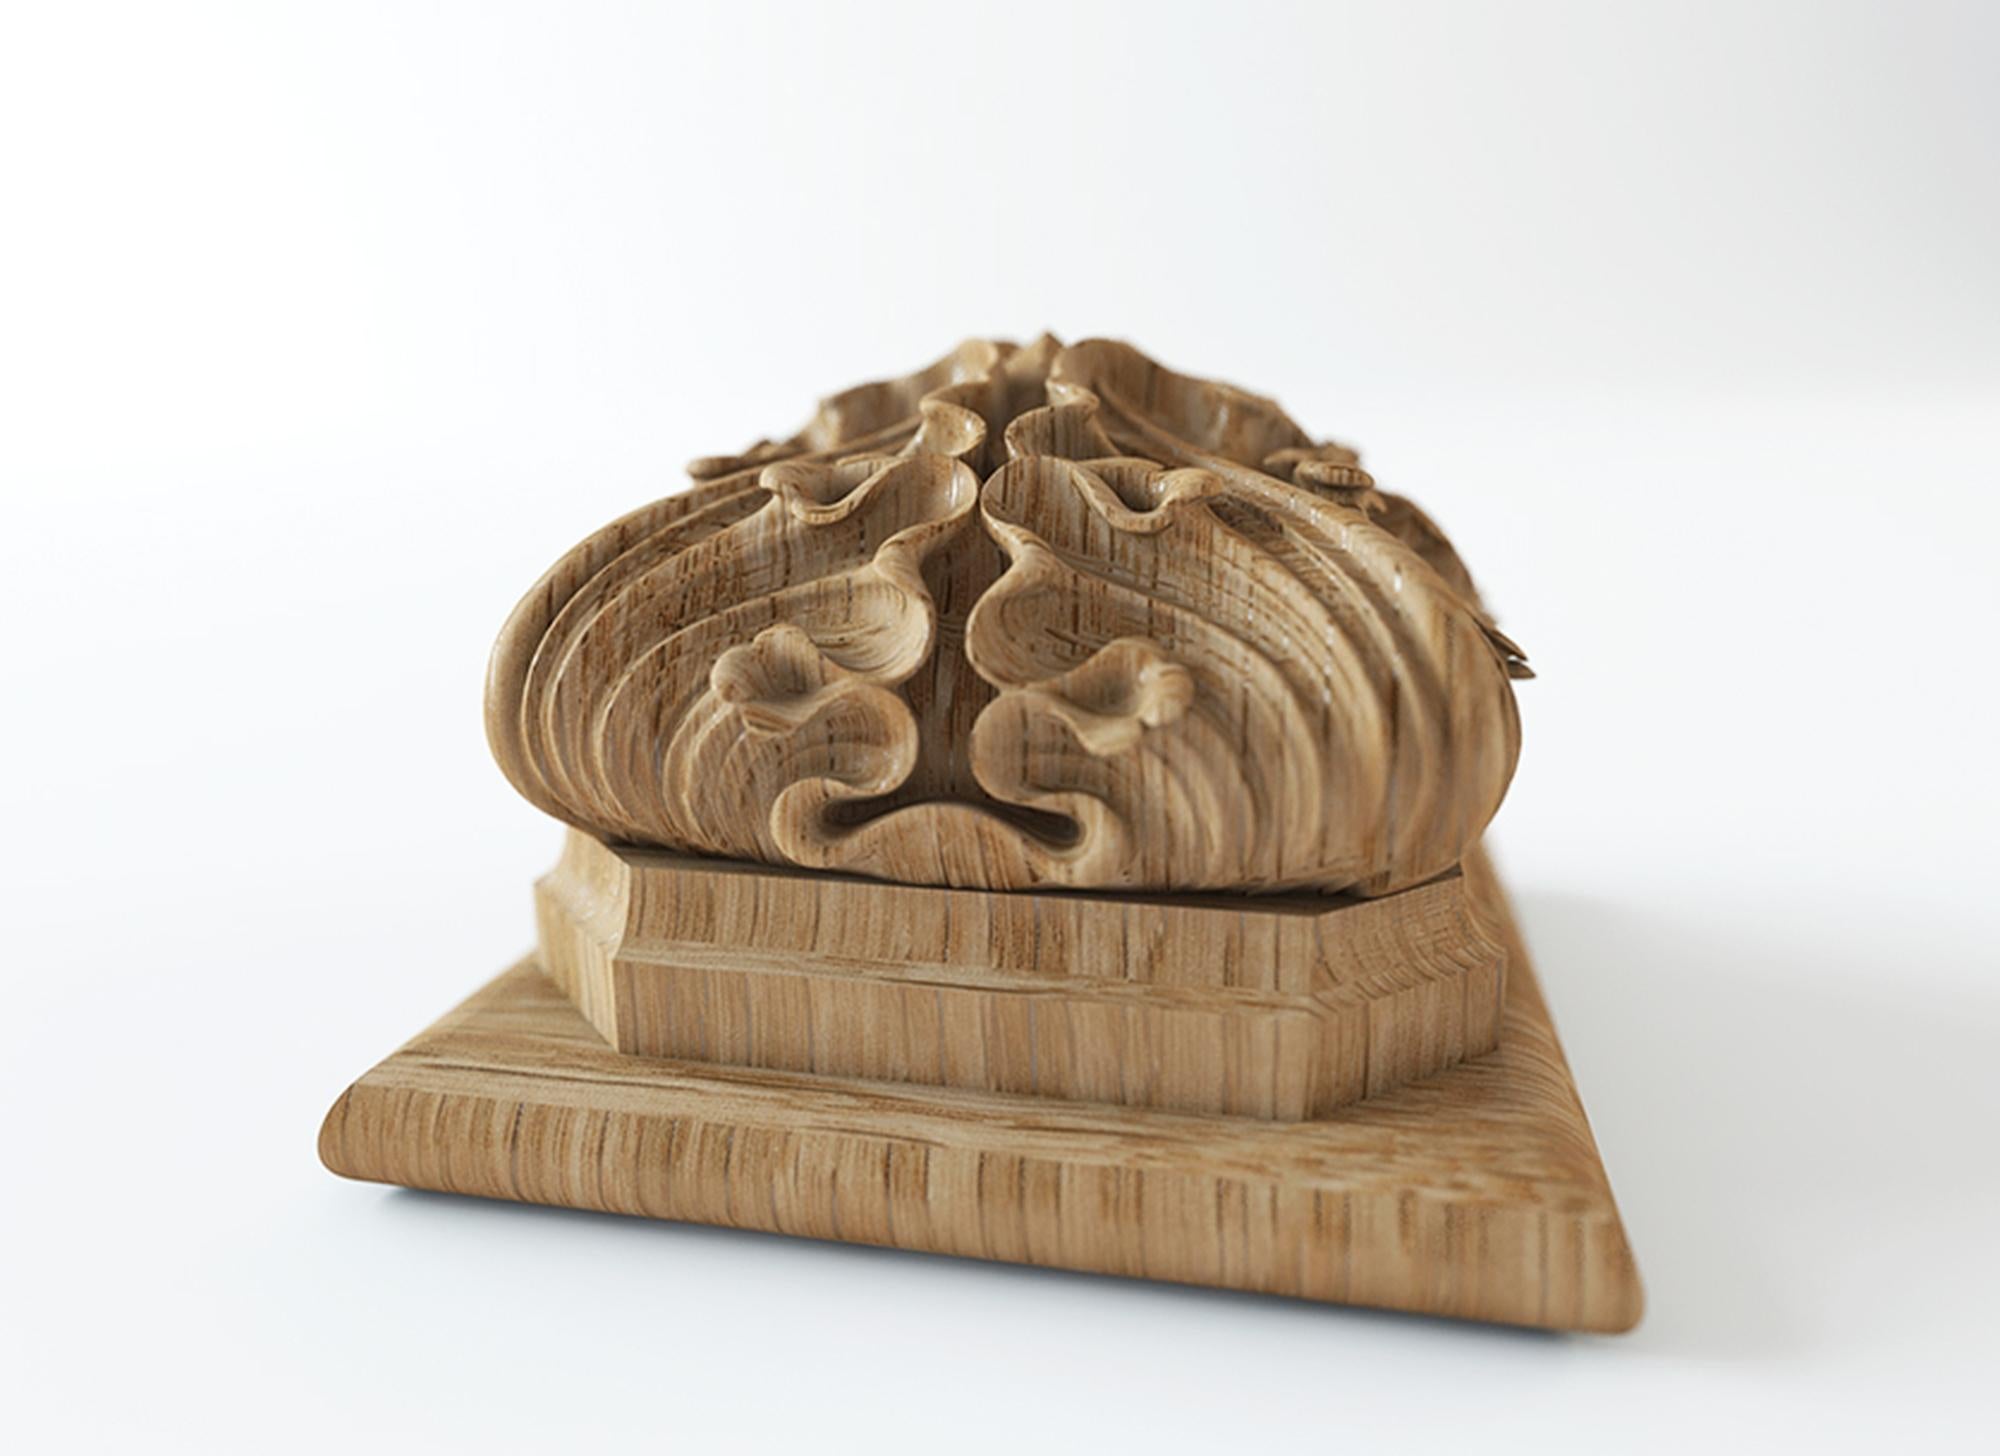 Unfinished high quality carved finial from oak or beech of your choice.

>> SKU: L-110

>> Dimensions (A x B x C):

1) 2.52